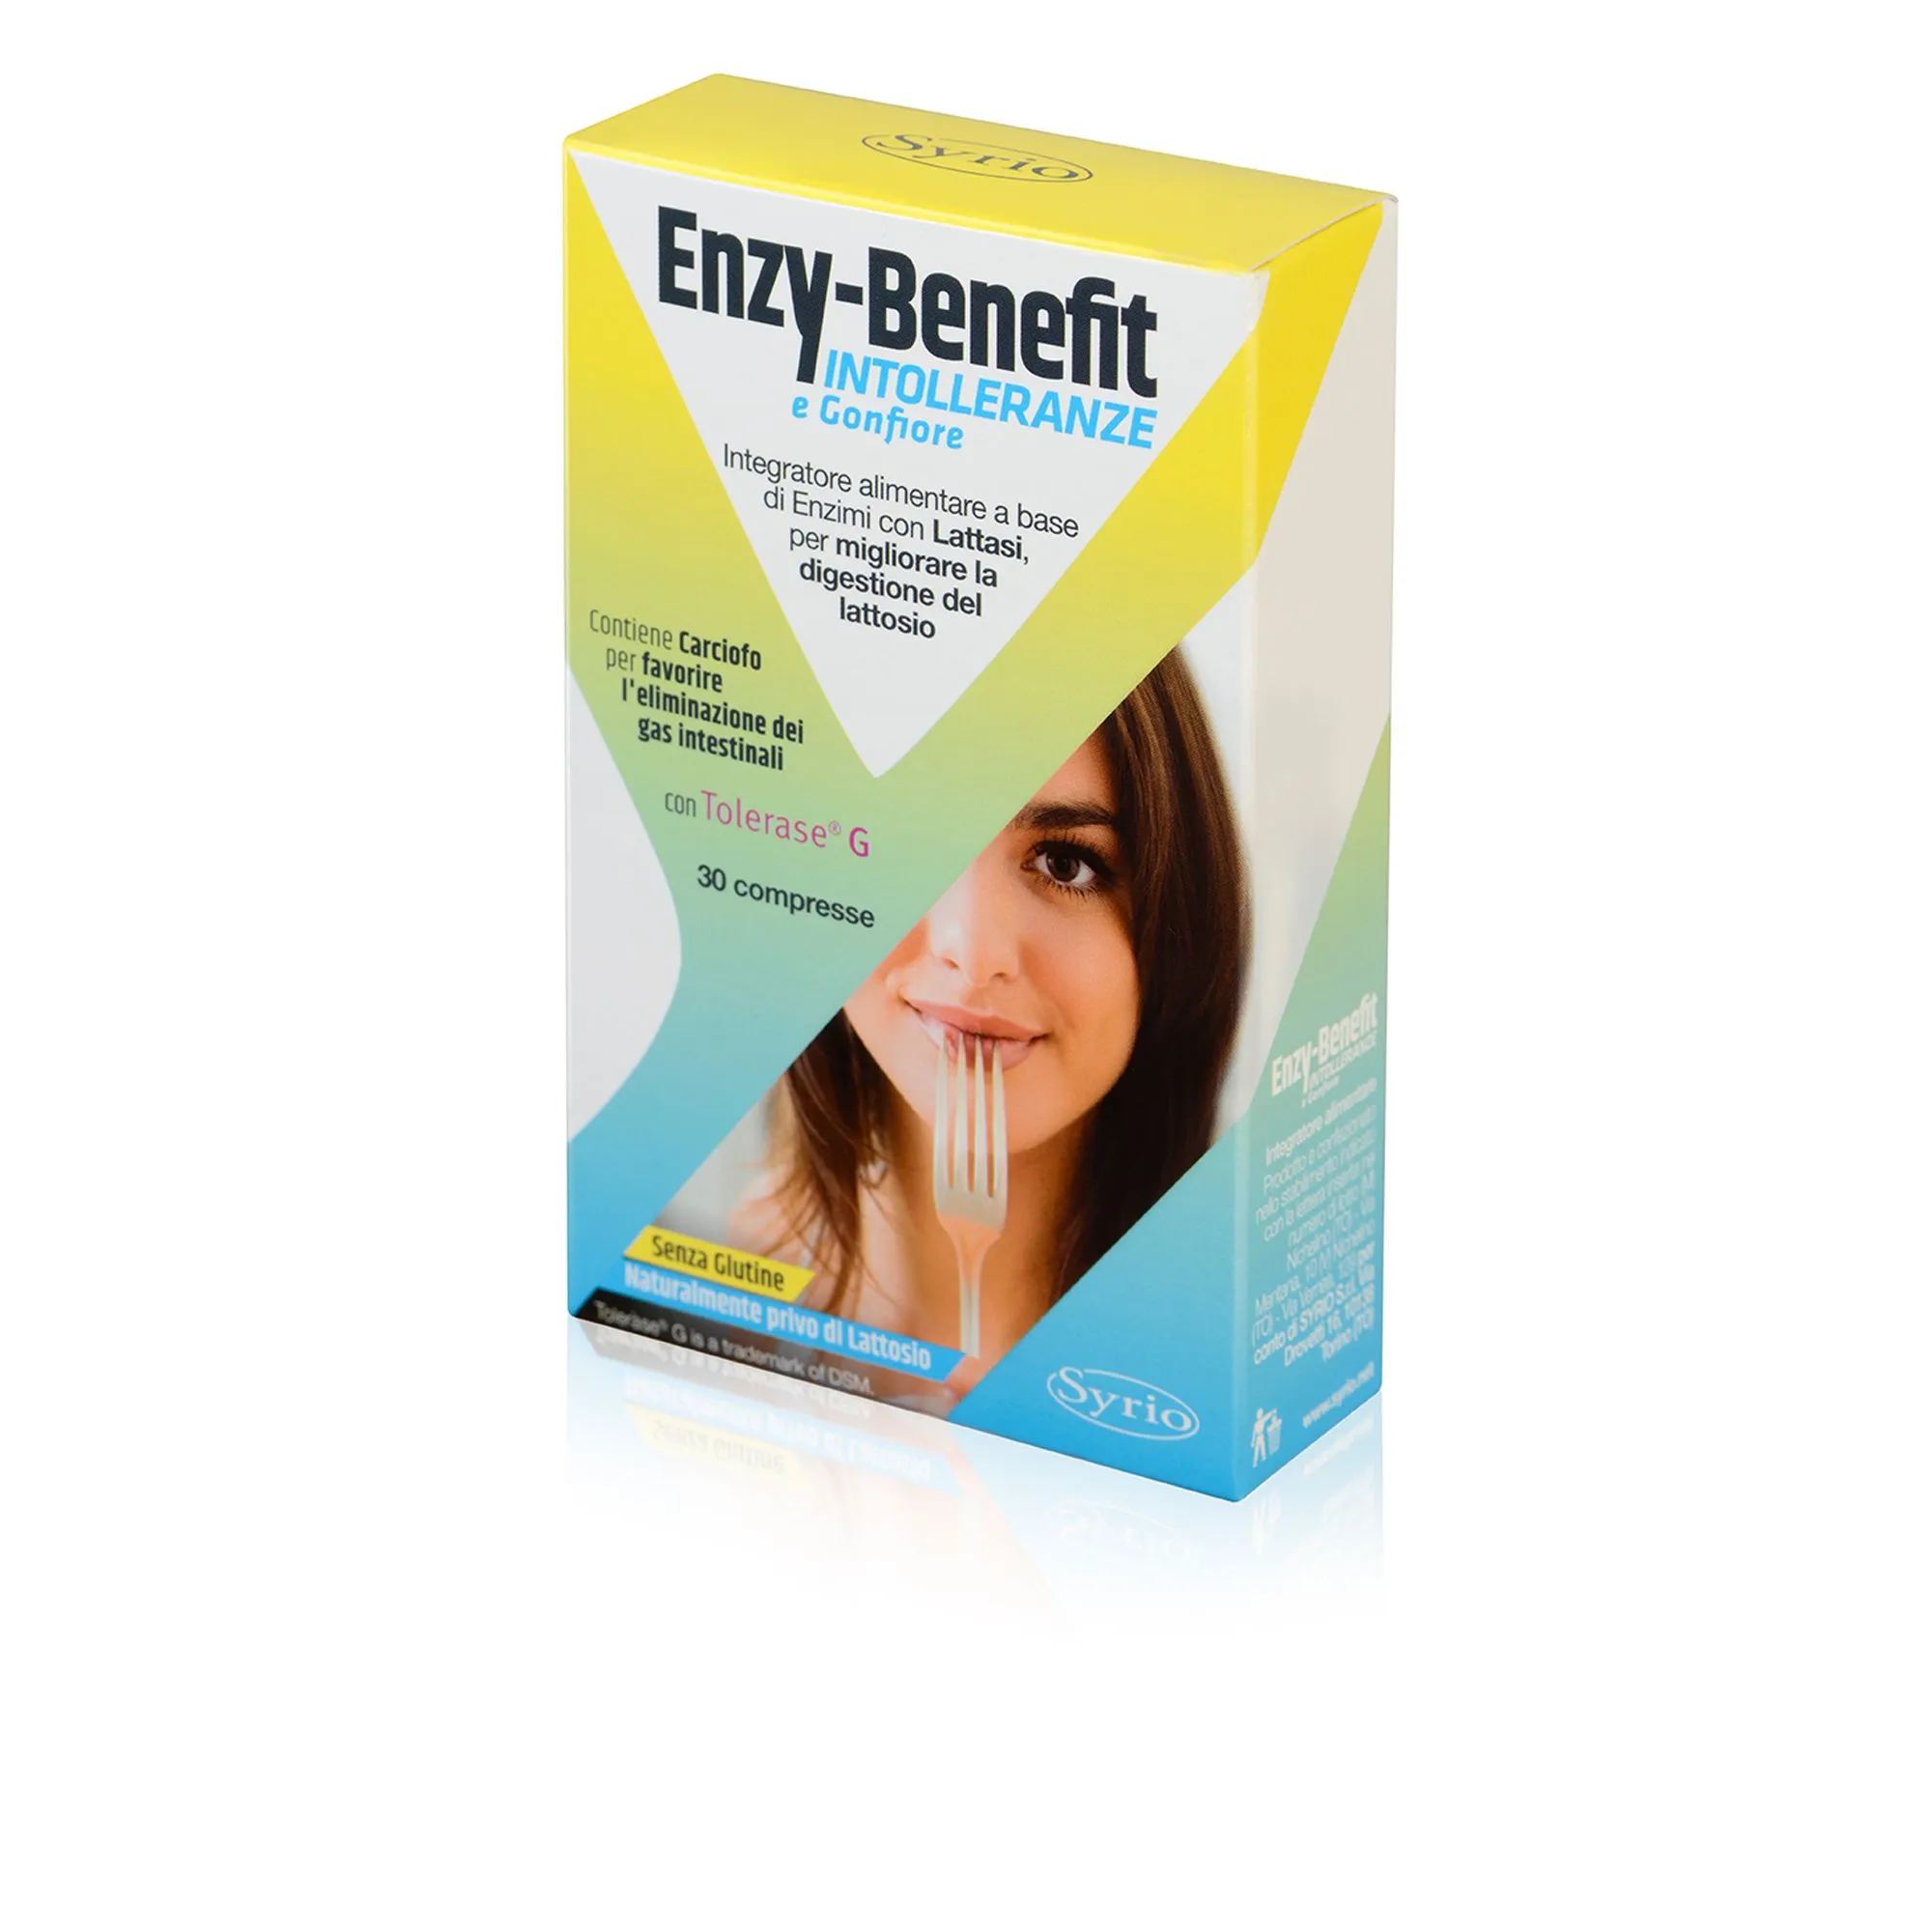 Enzy-Benefit Integratore alimentare (30cps)